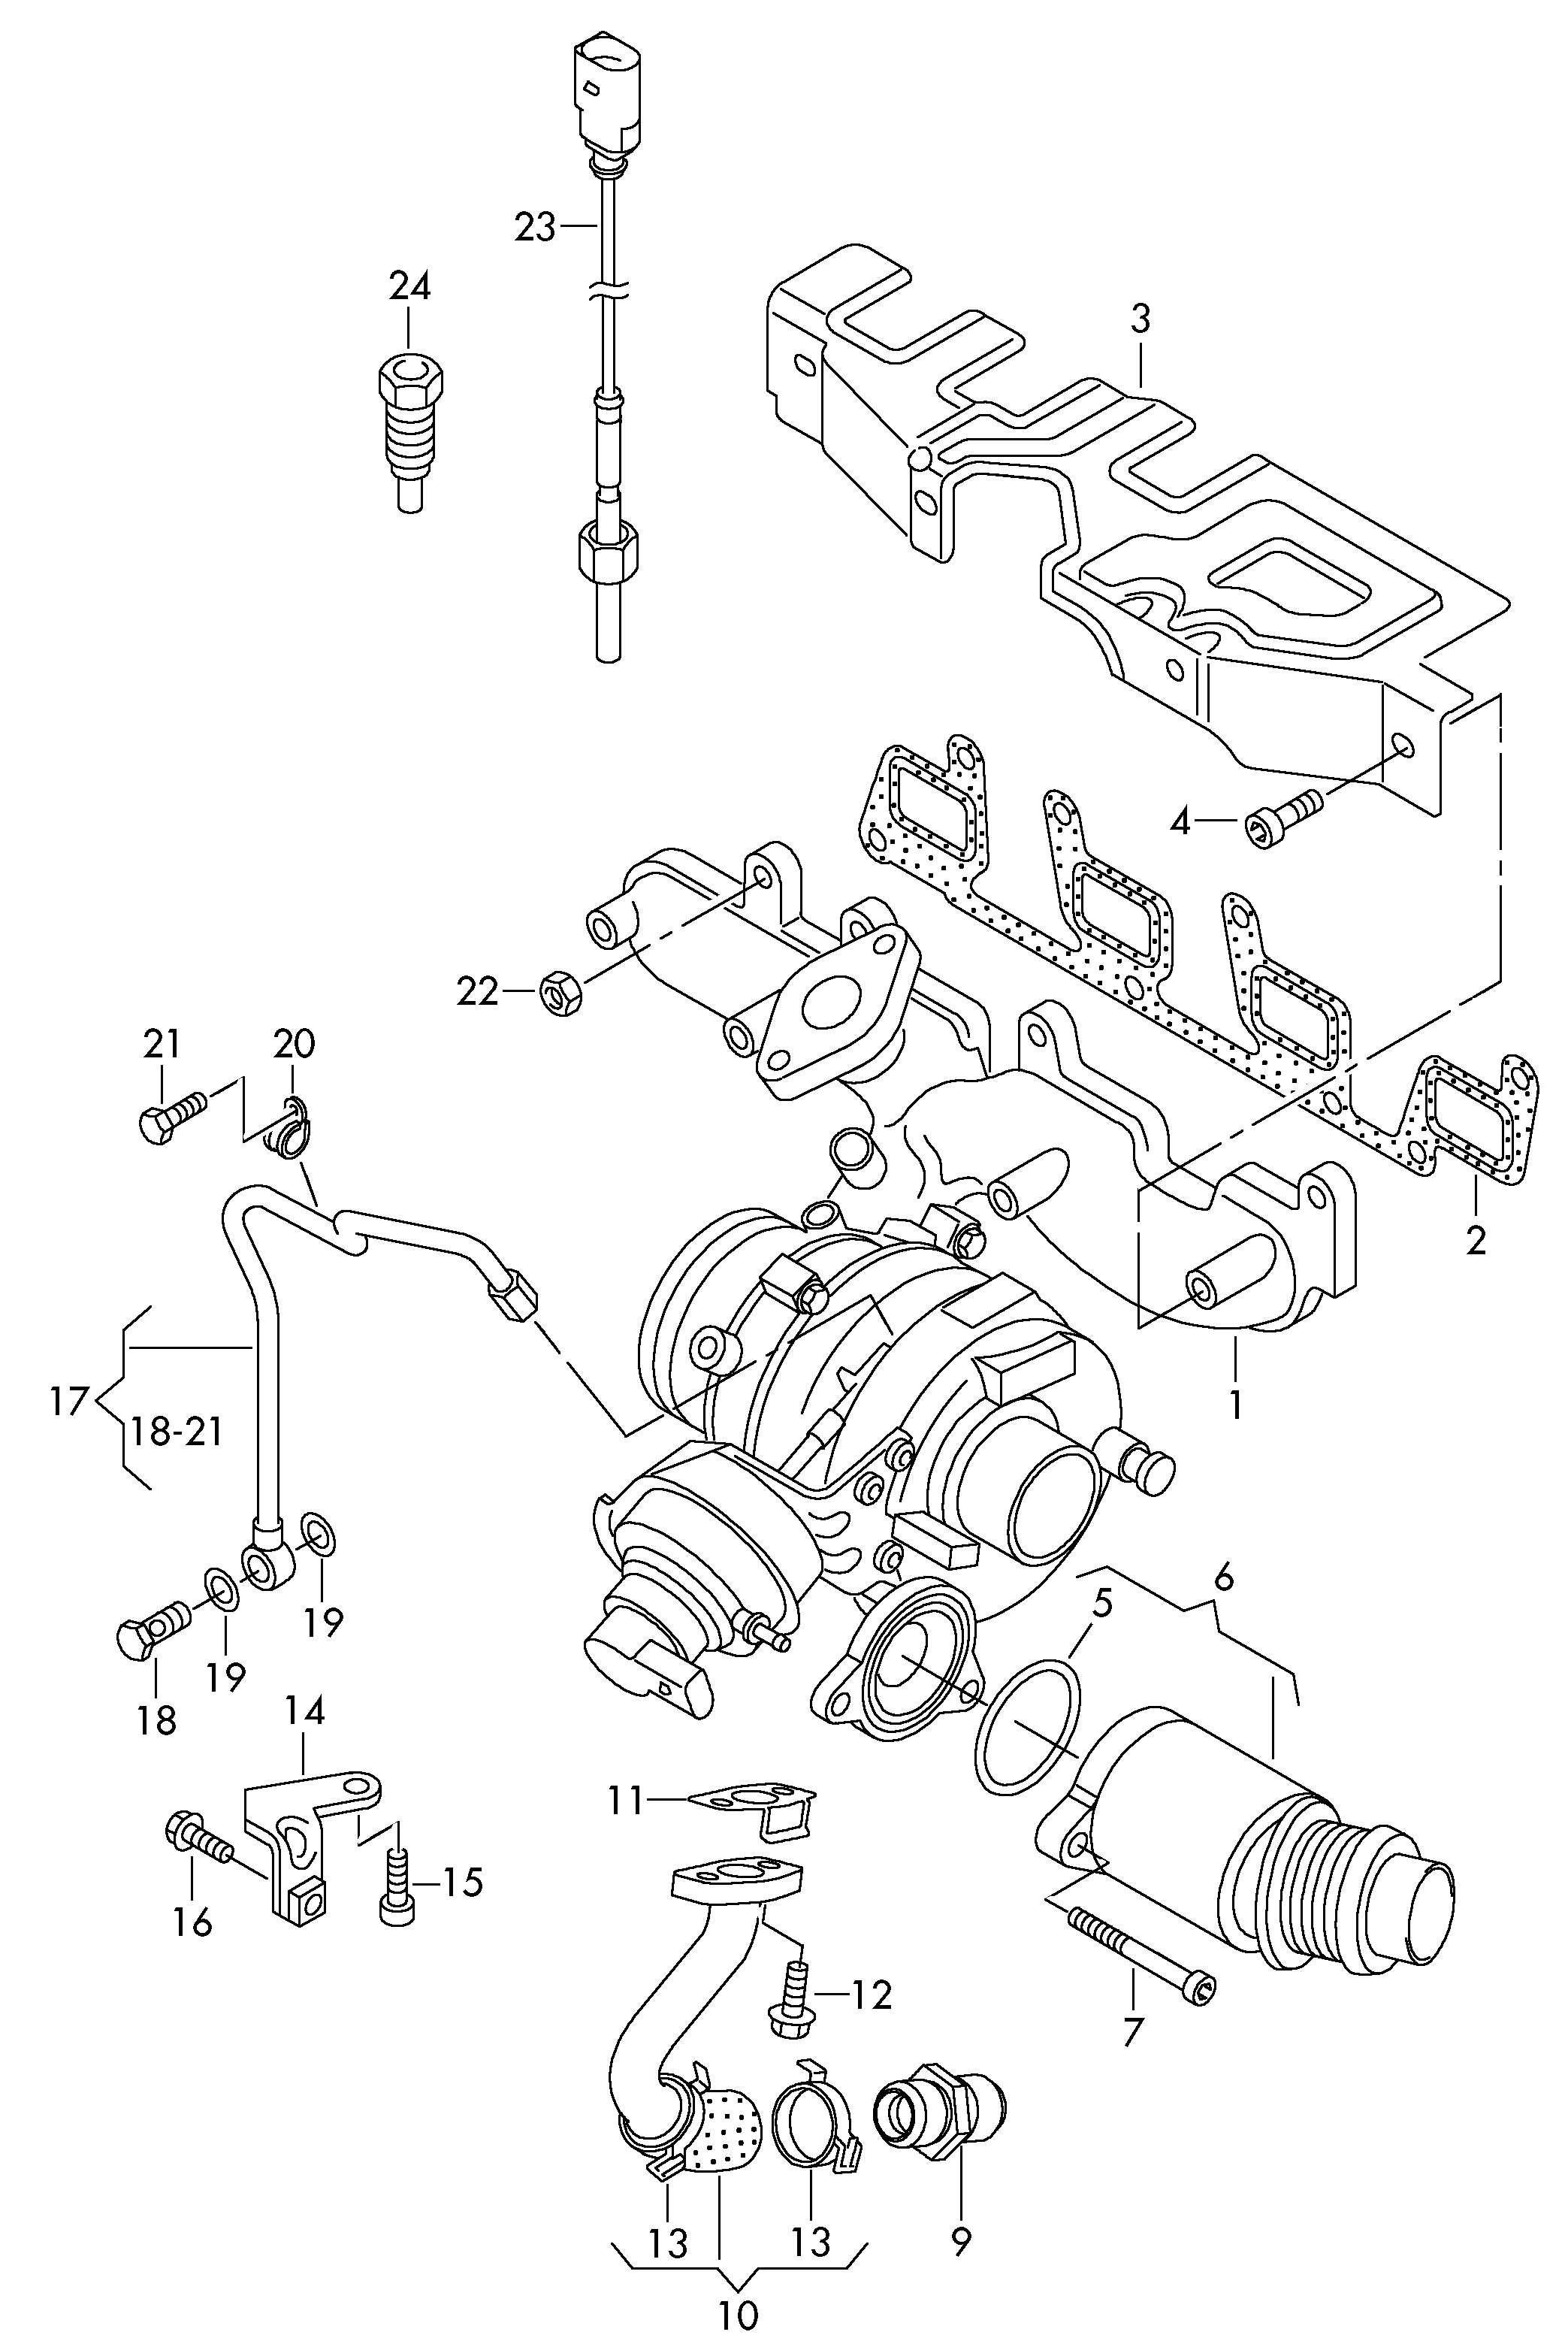 Exhaust manifold with turbo-<br>charger 2.0 Ltr. - Transporter - tr